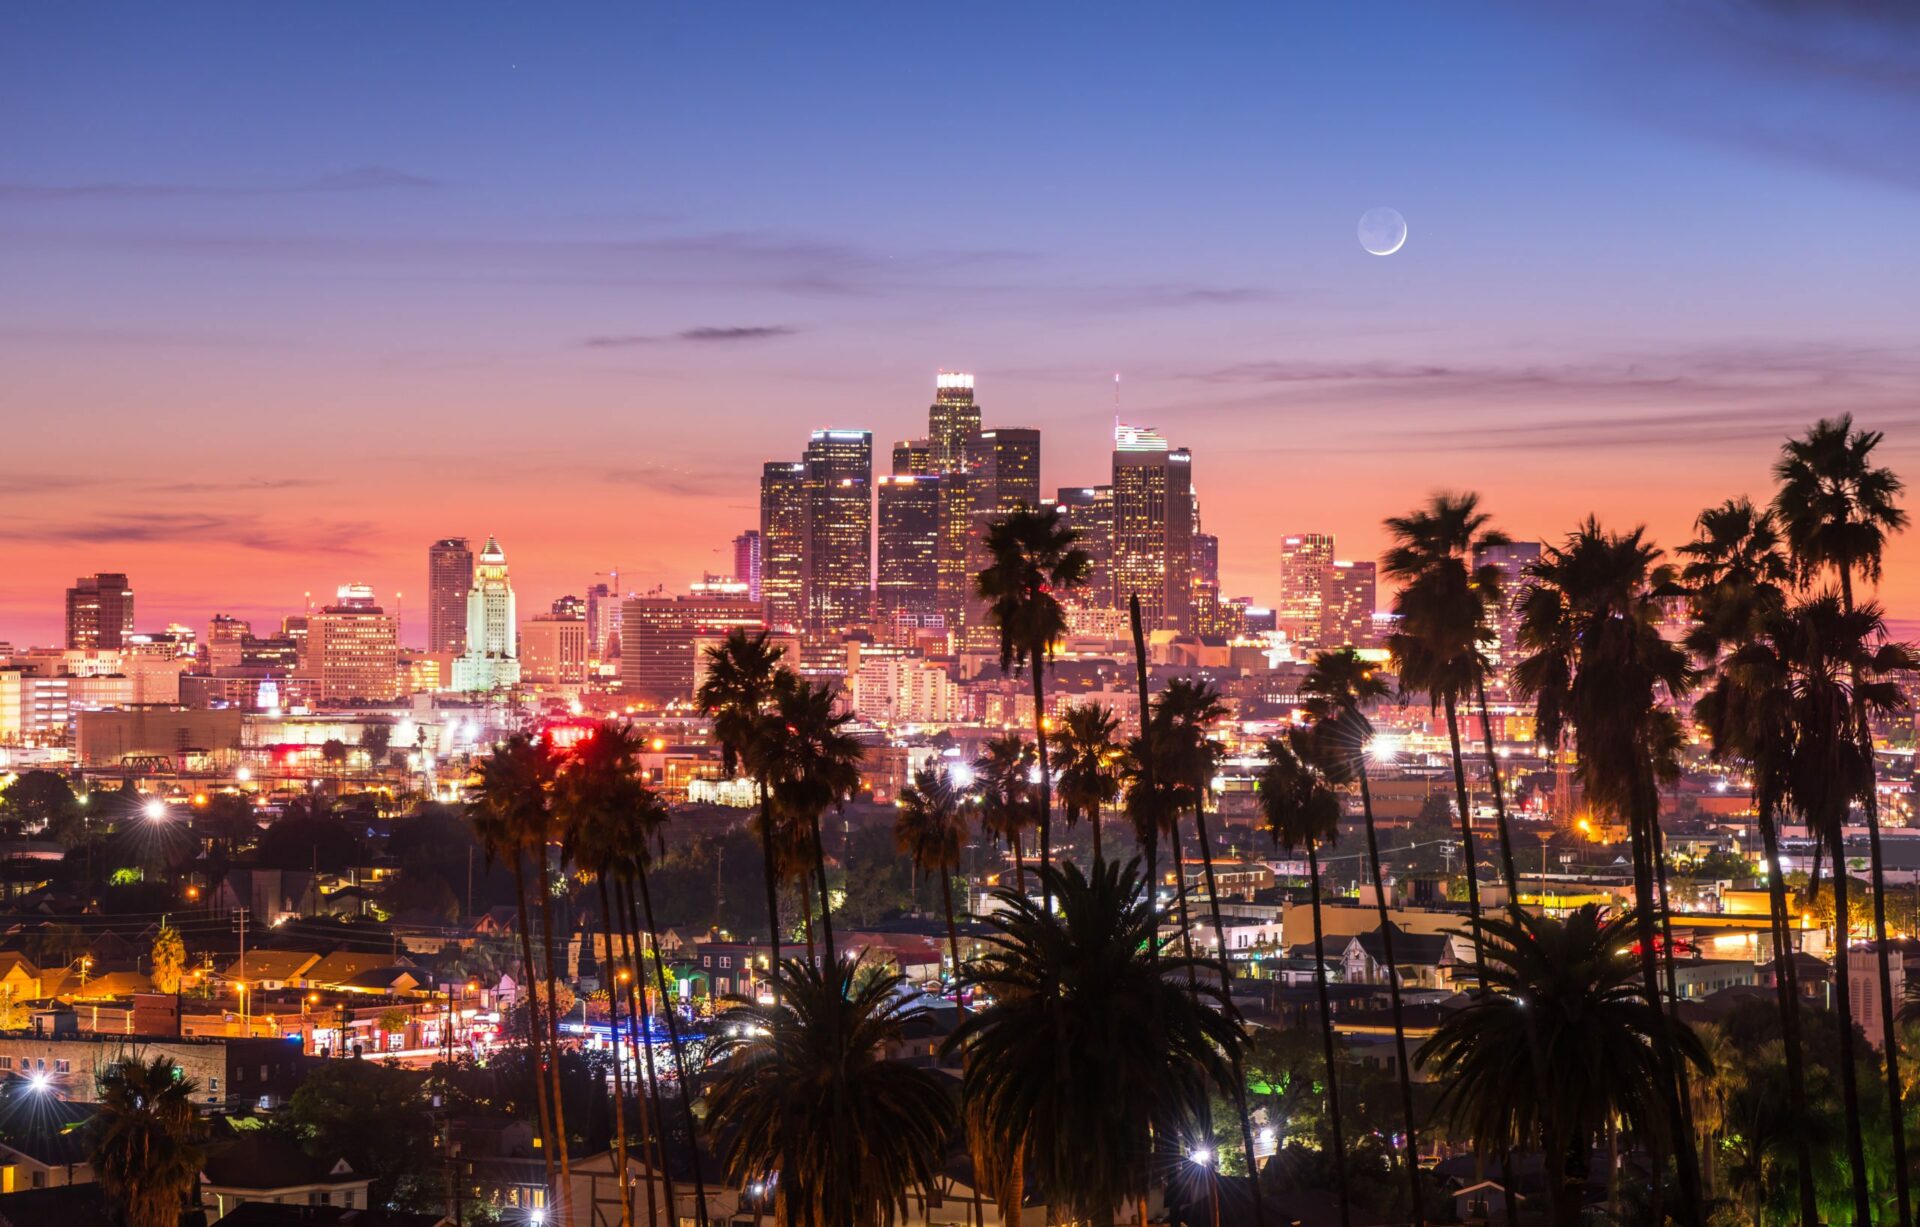 Built in LA: Built In LA’s 12 Featured Companies of the Month